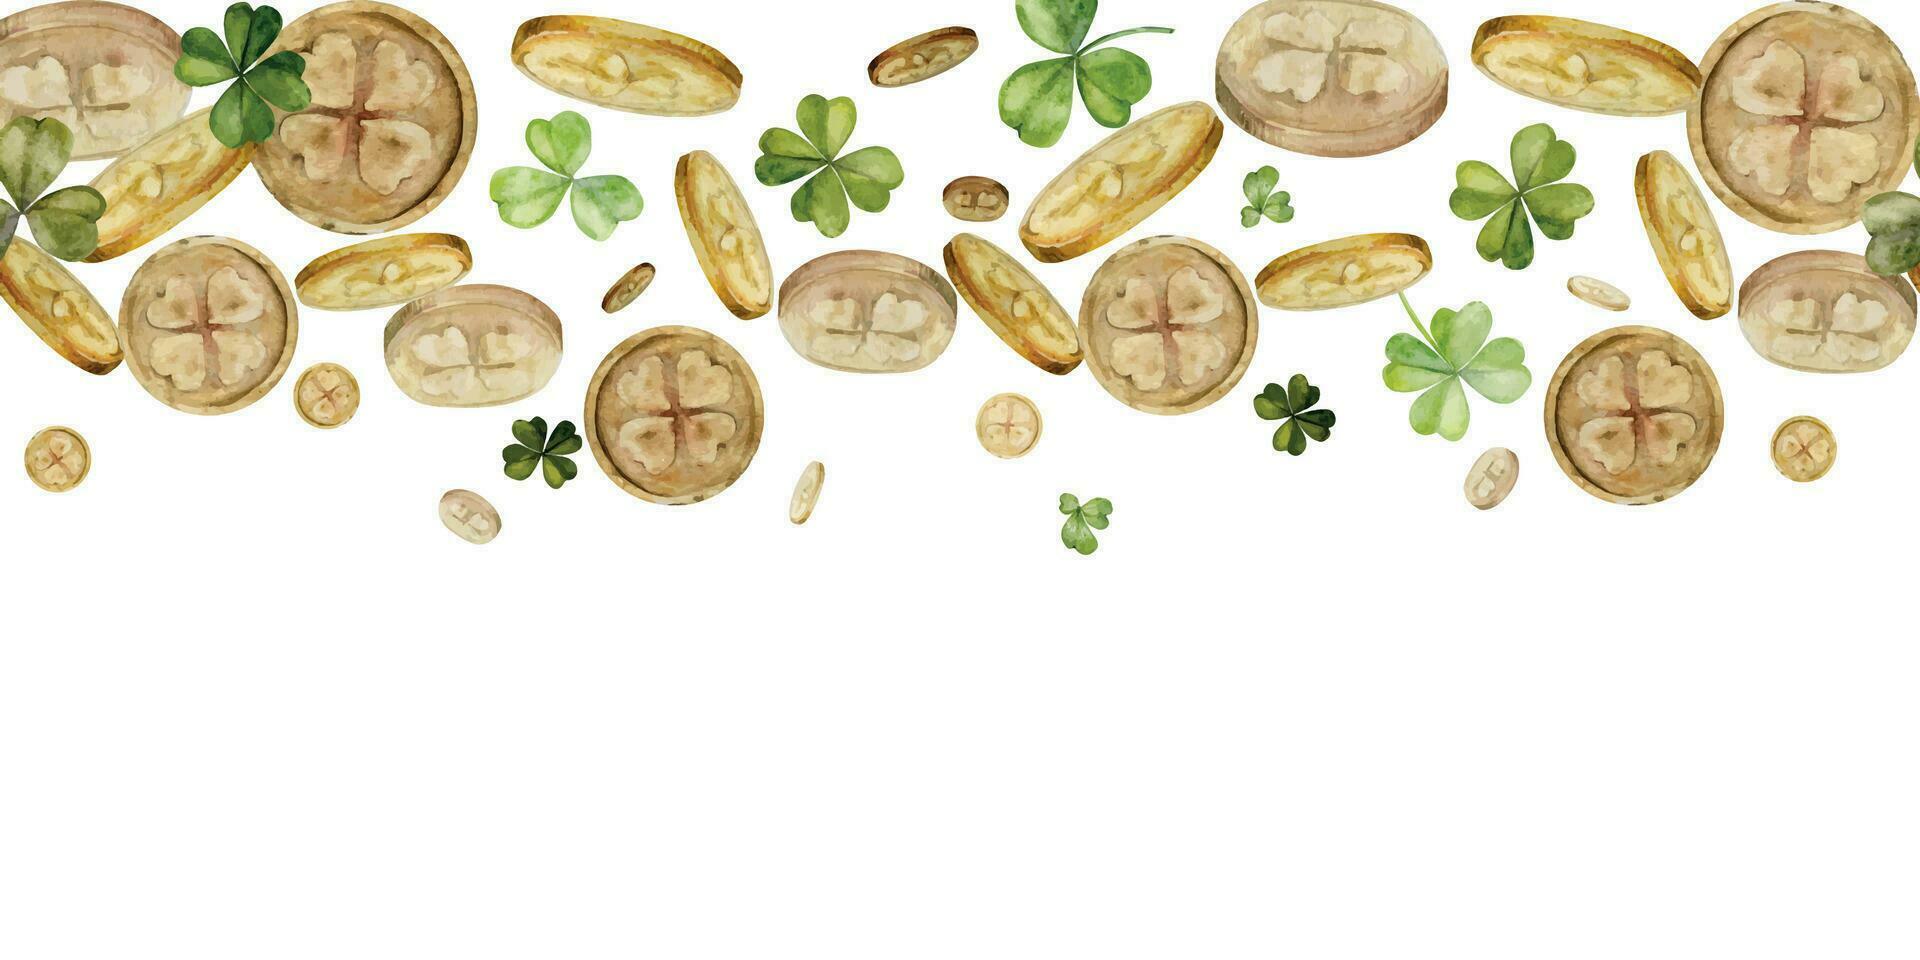 Watercolor hand drawn illustration, Saint Patrick holiday. Leprechaun gold coins, lucky clover. Ireland tradition. Seamless border Isolated on white background. For invitations, print, website, cards. vector